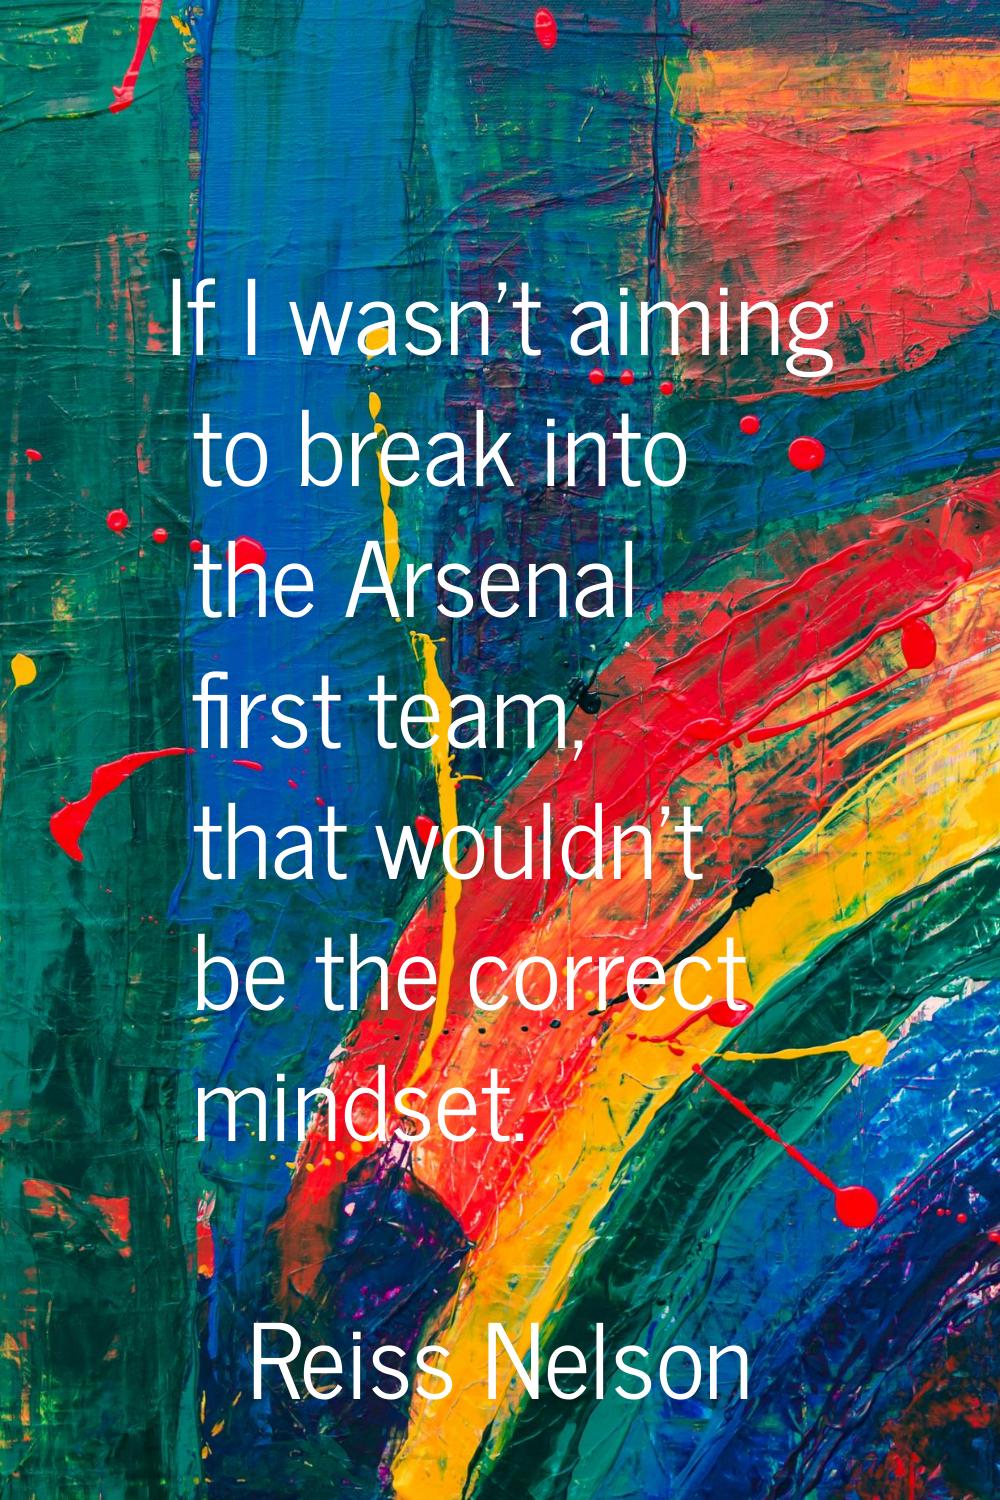 If I wasn't aiming to break into the Arsenal first team, that wouldn't be the correct mindset.